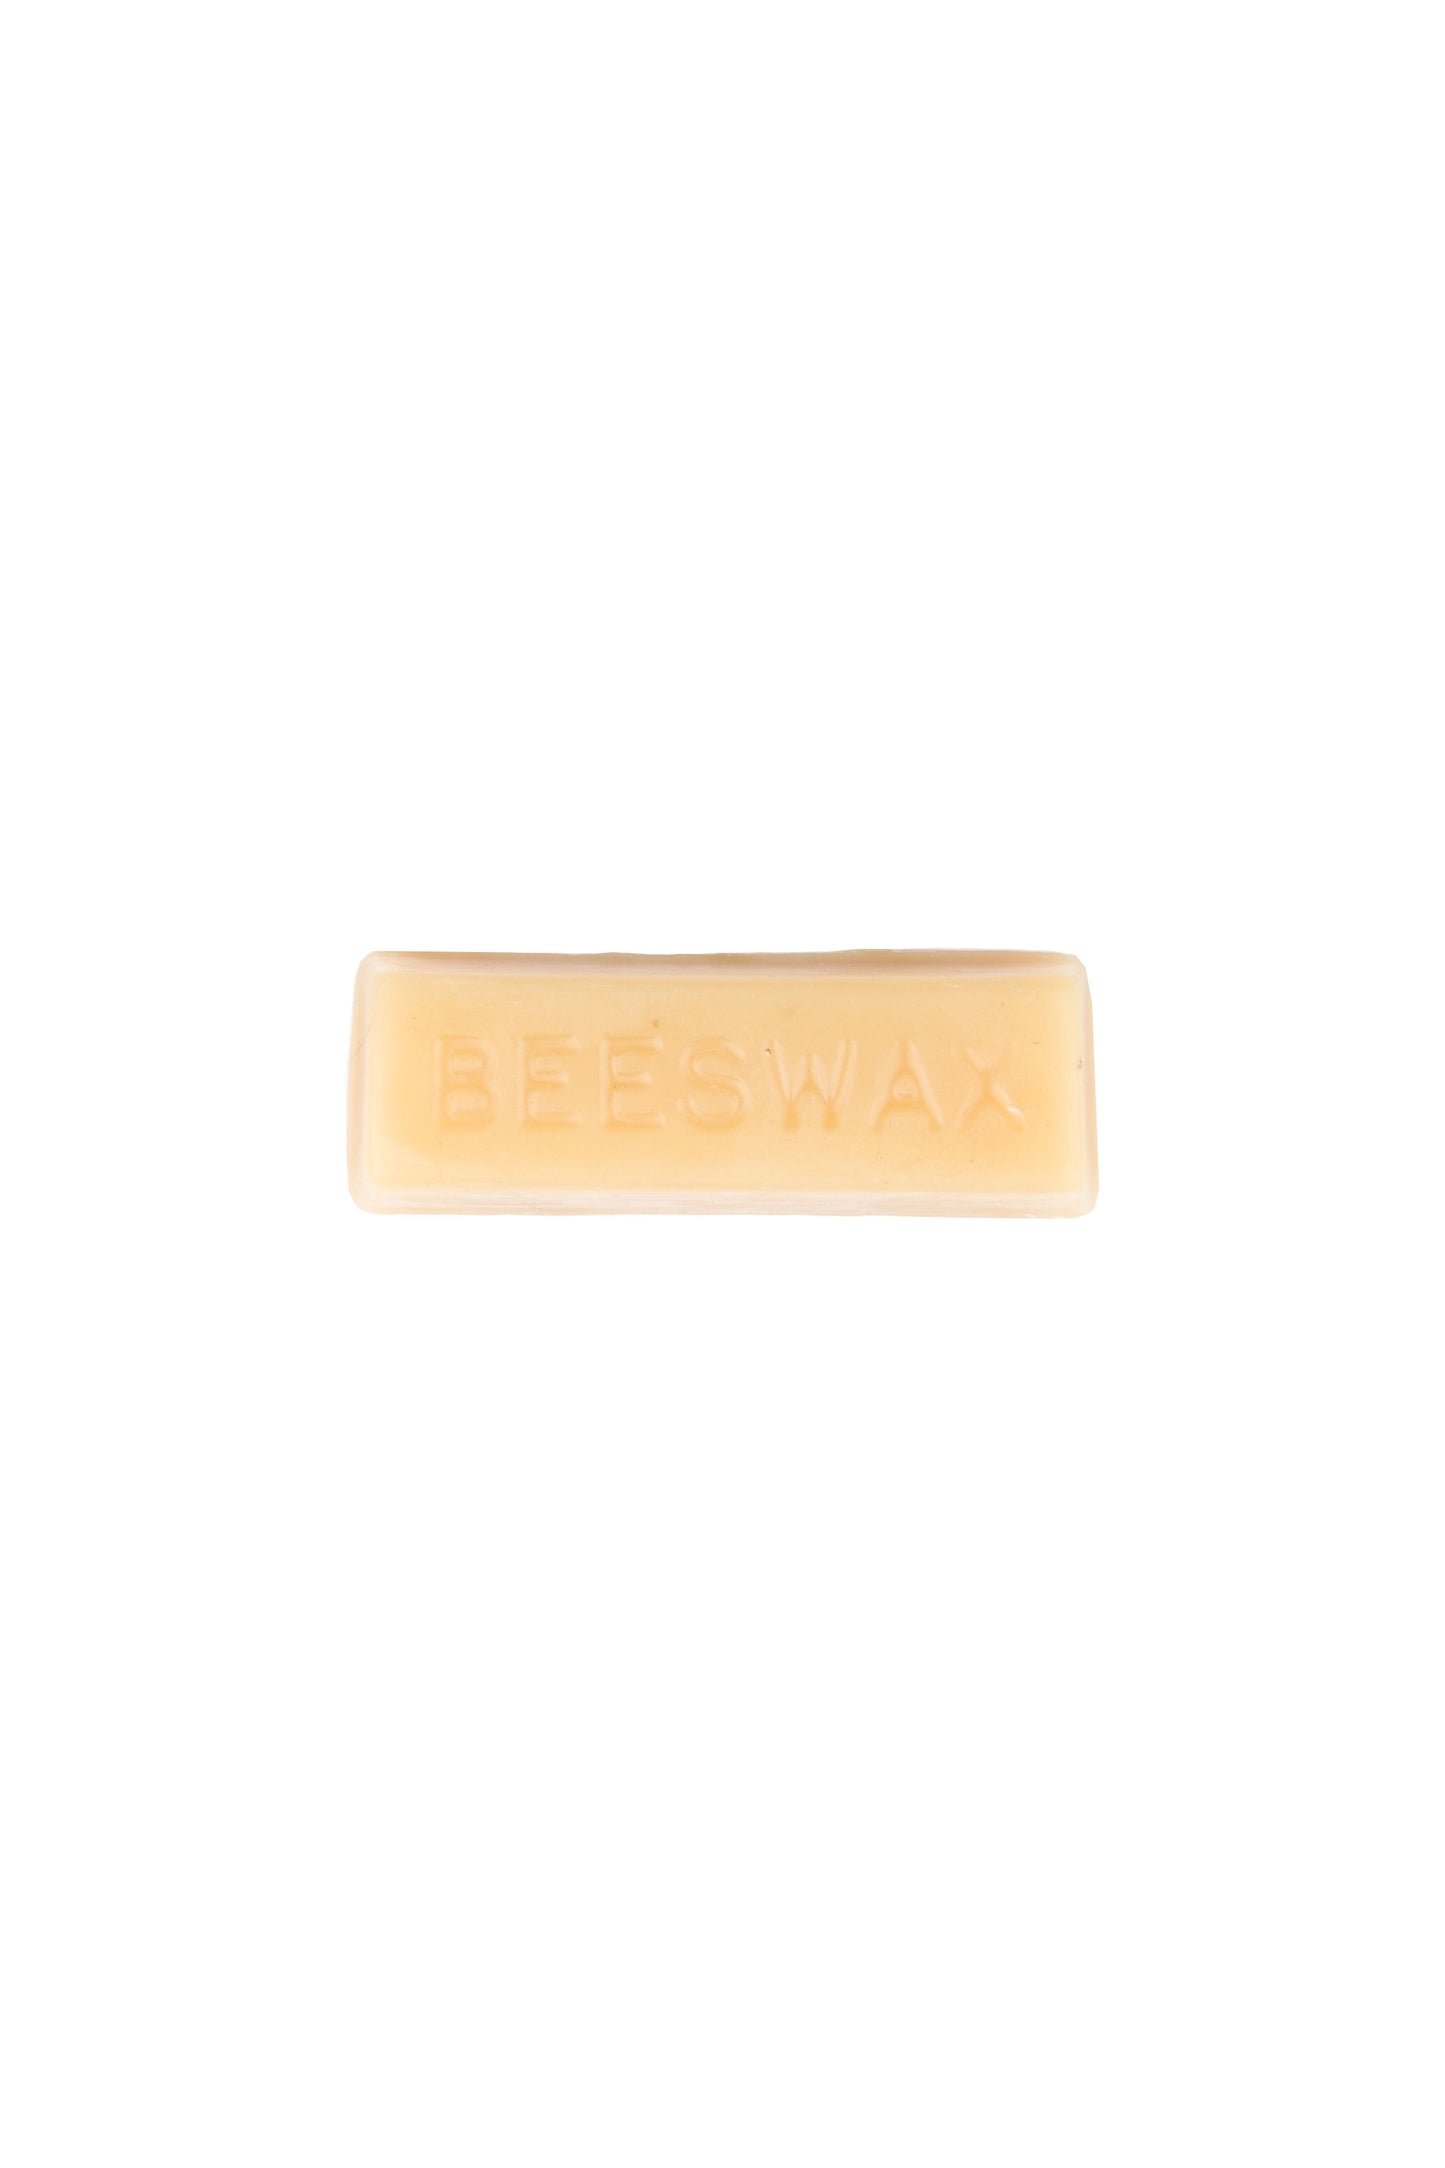 Fusion Mineral Paint Beeswax Distressing Block, 25g